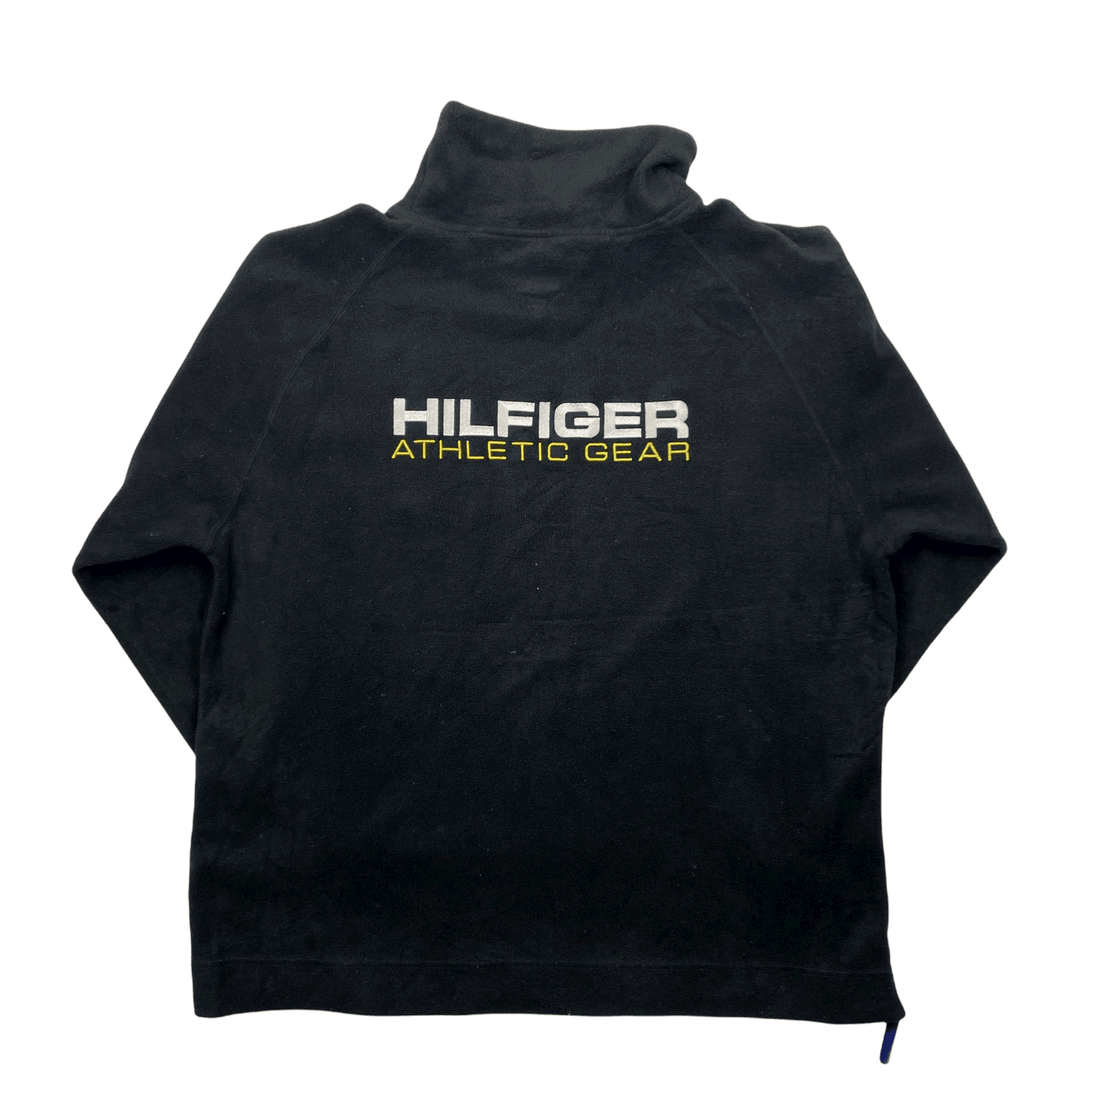 Vintage 90s Black Tommy Hilfiger Spell-Out Fleece Sweatshirt - Large (Recommended Size - Extra Large) - The Streetwear Studio